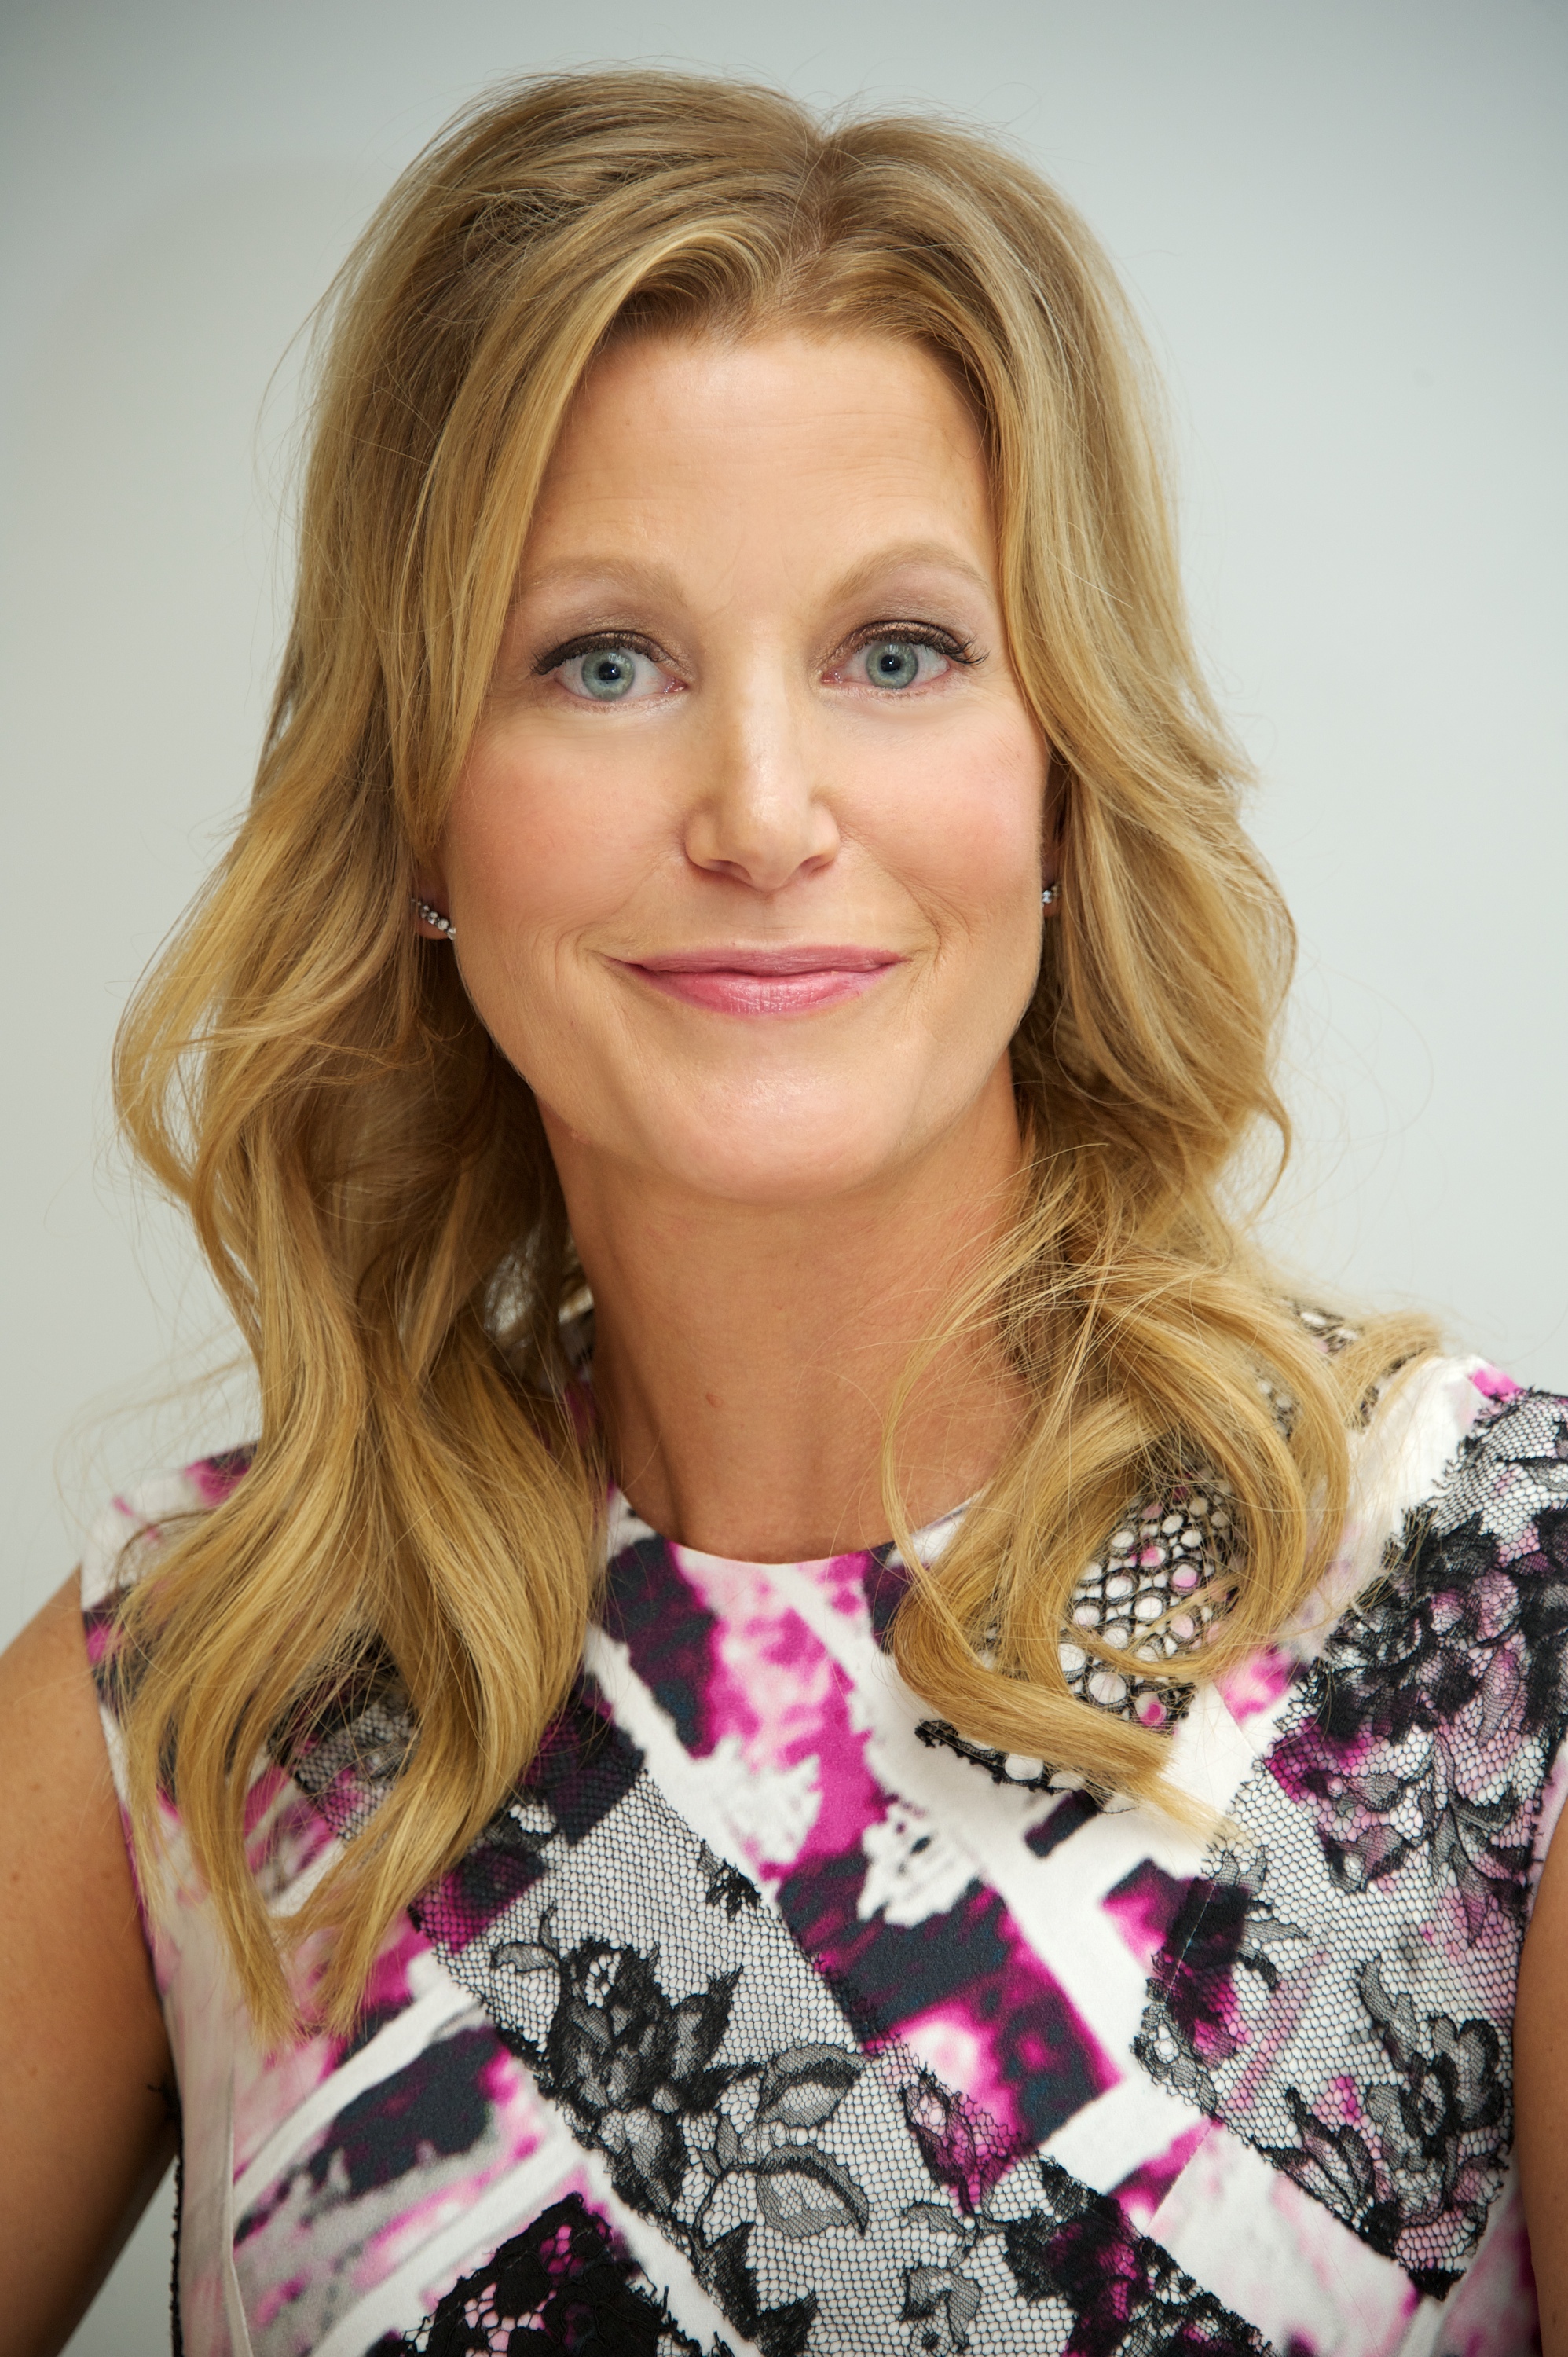 Anna Gunn at the 'Gracepoint' Press Conference on Sept. 30, 2014 in Beverly Hills, California.